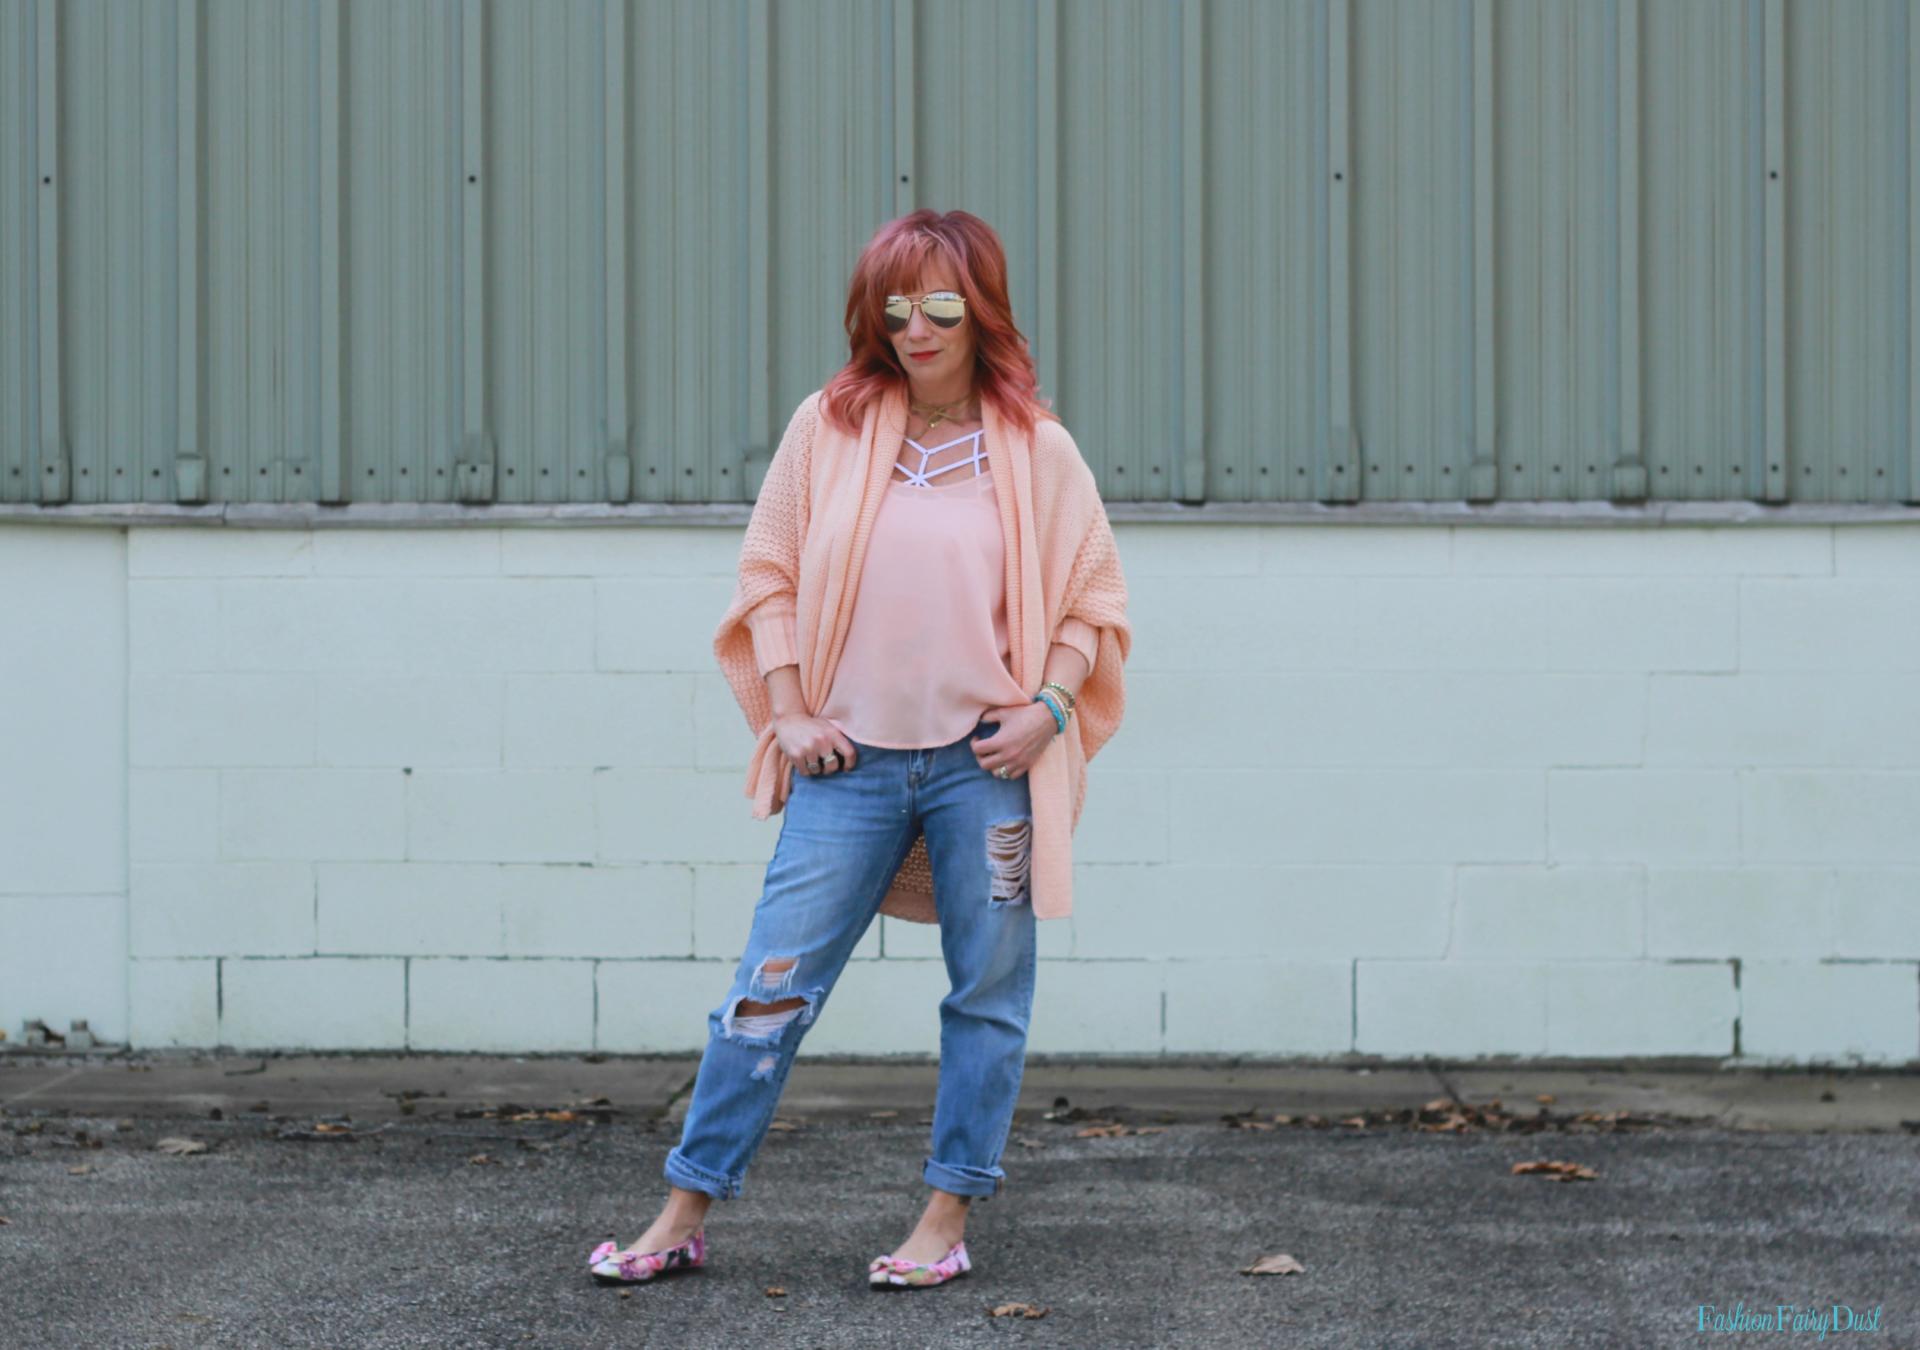 Peach cocoon cardigan, floral print flats and distressed jeans. How to toughen up pastels.